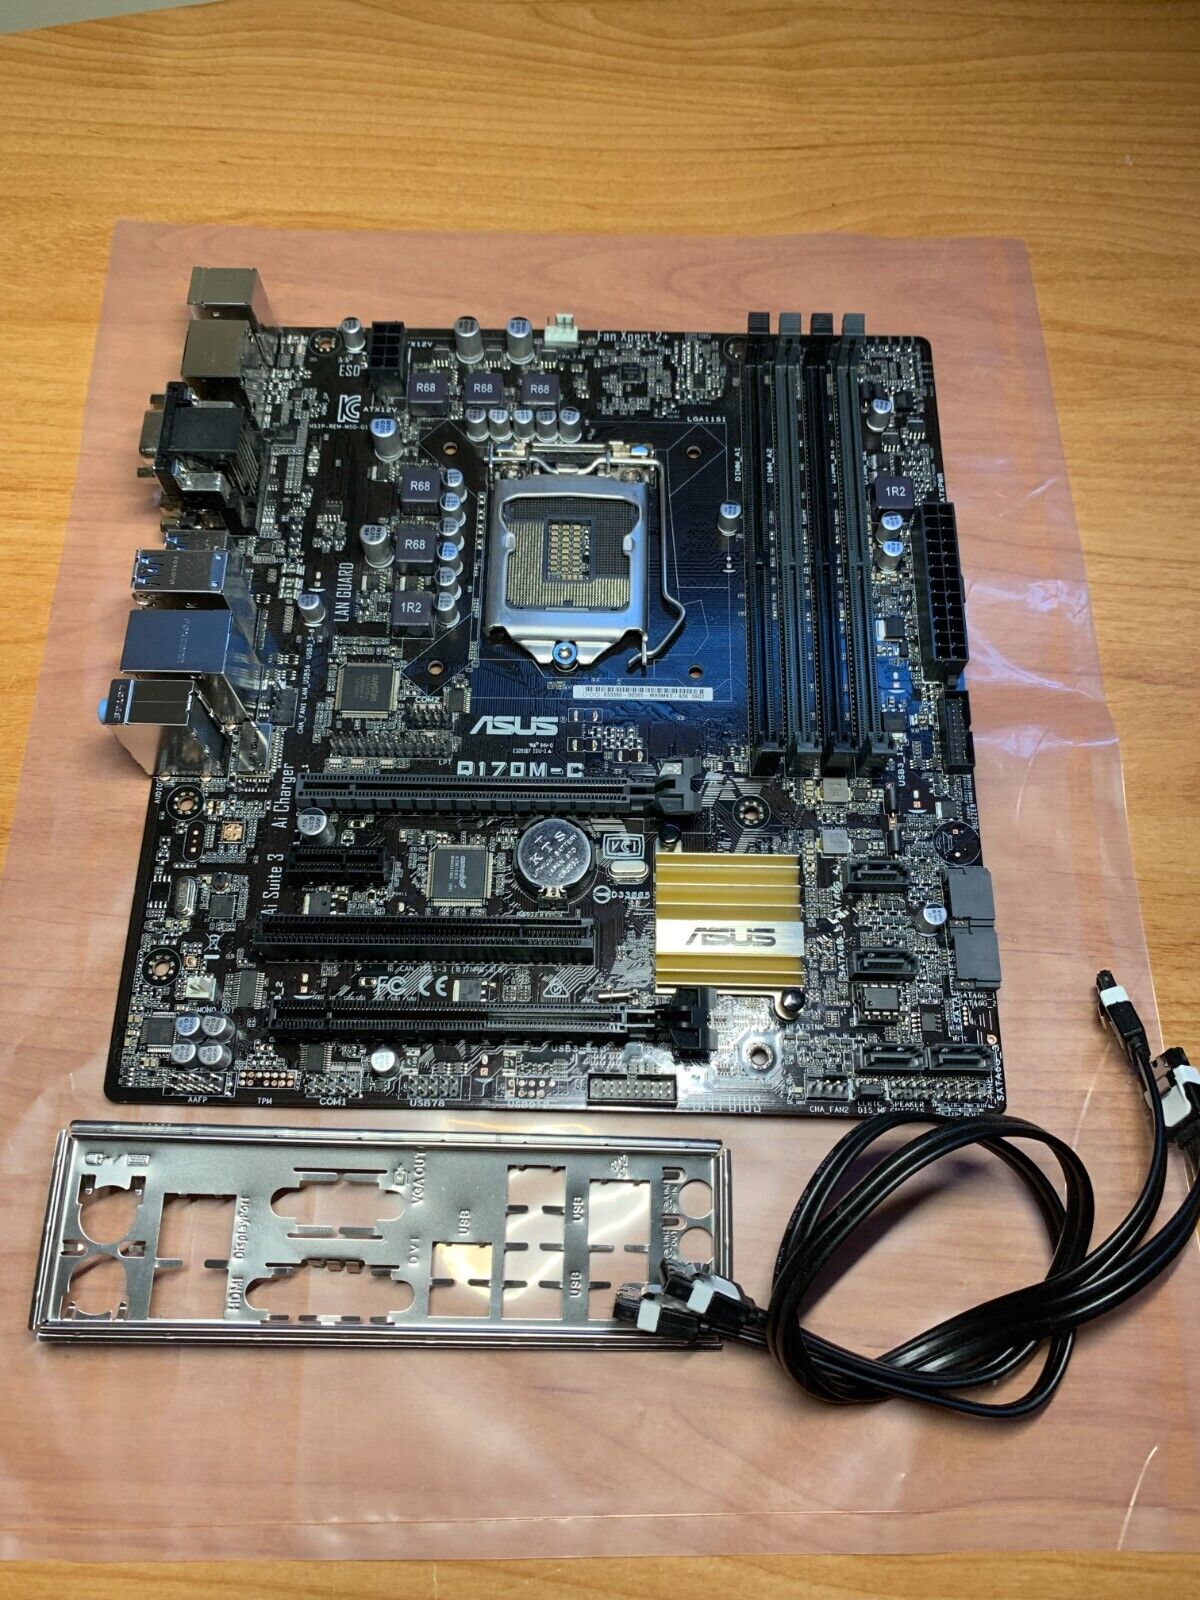 ASUS Q170M-C Motherboard LGA1151 with Sata cables and IO Shield (TESTED)